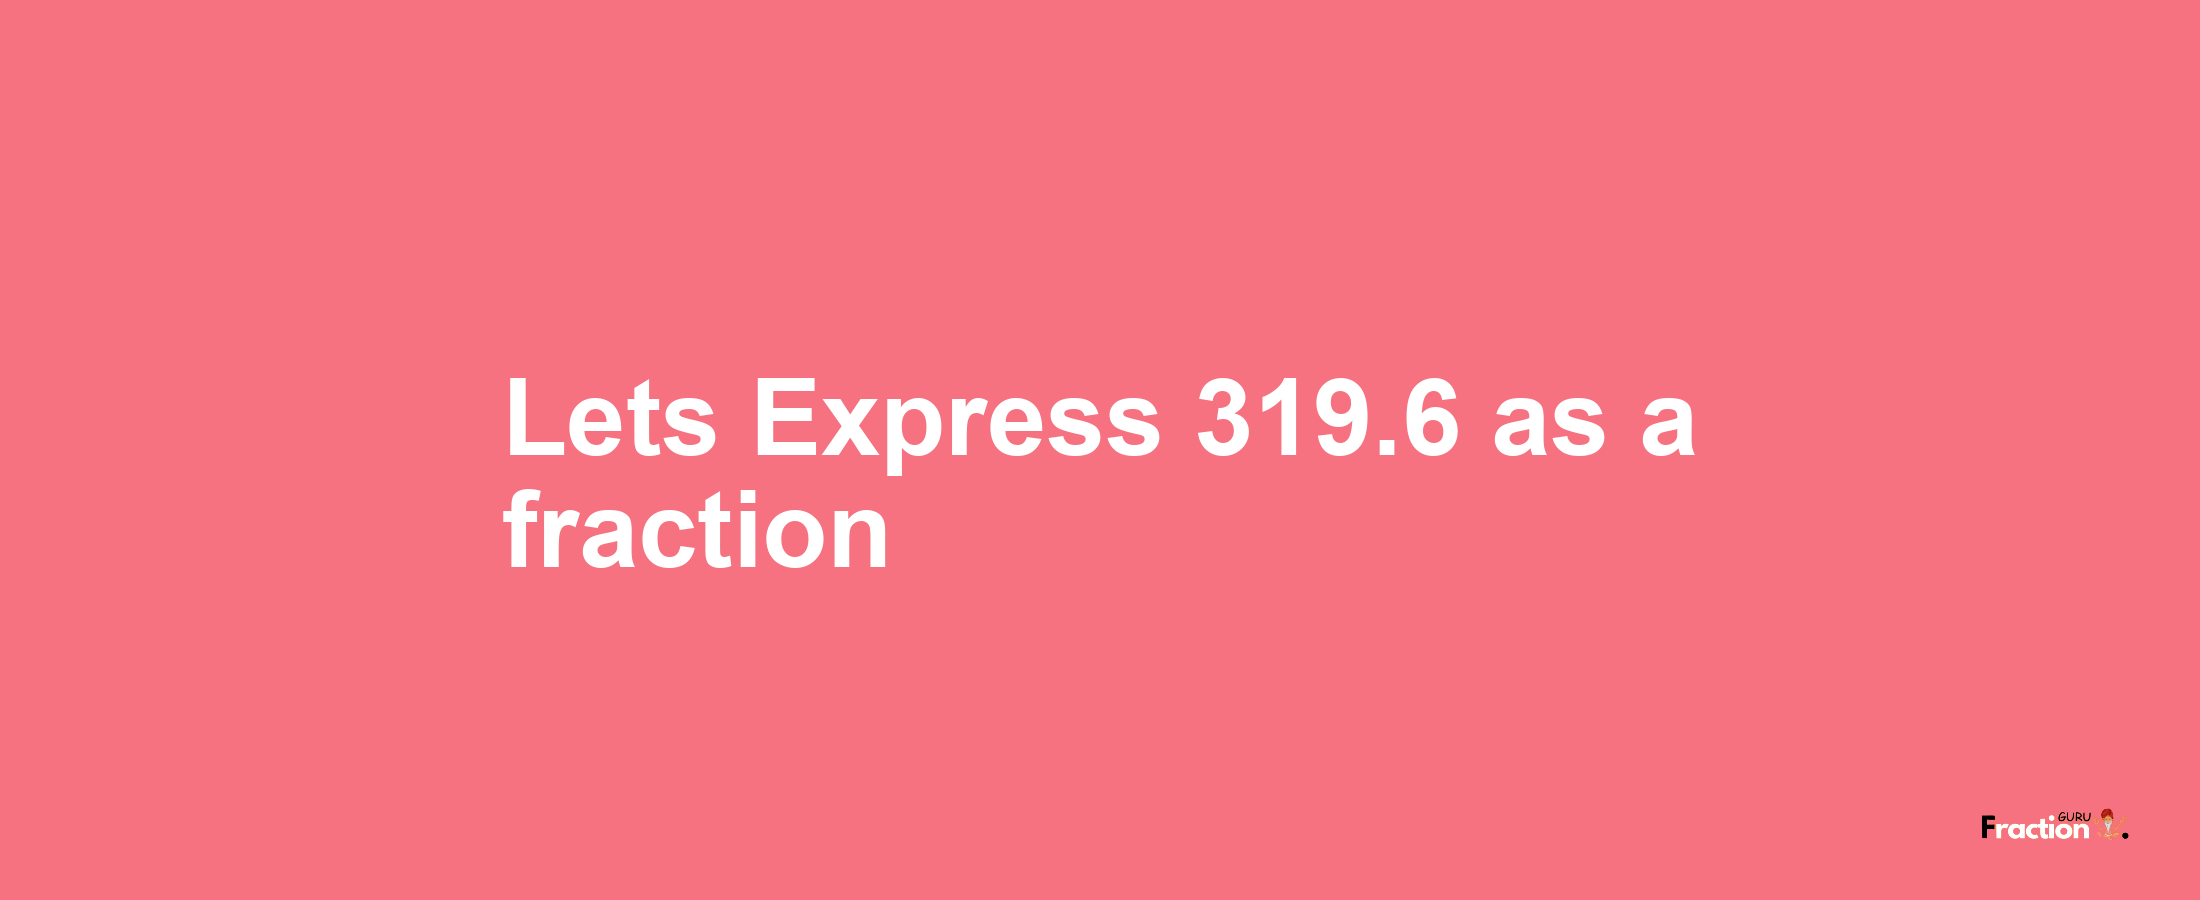 Lets Express 319.6 as afraction